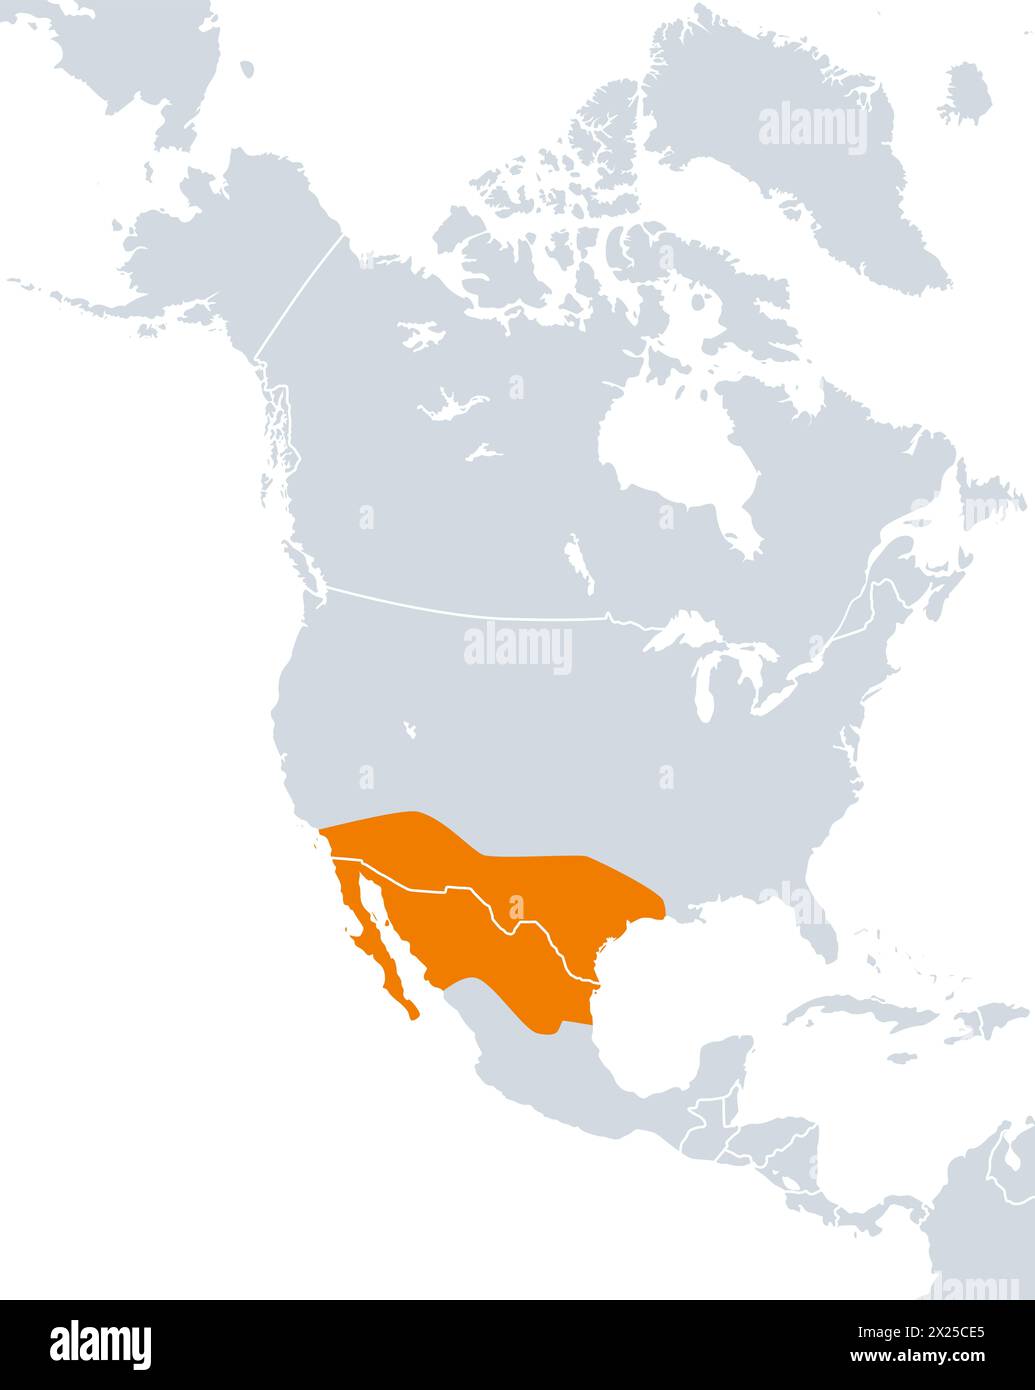 Aridoamerica map, ecological region of dry and arid climate, spanning Northern Mexico and Southwestern United States. Stock Photo